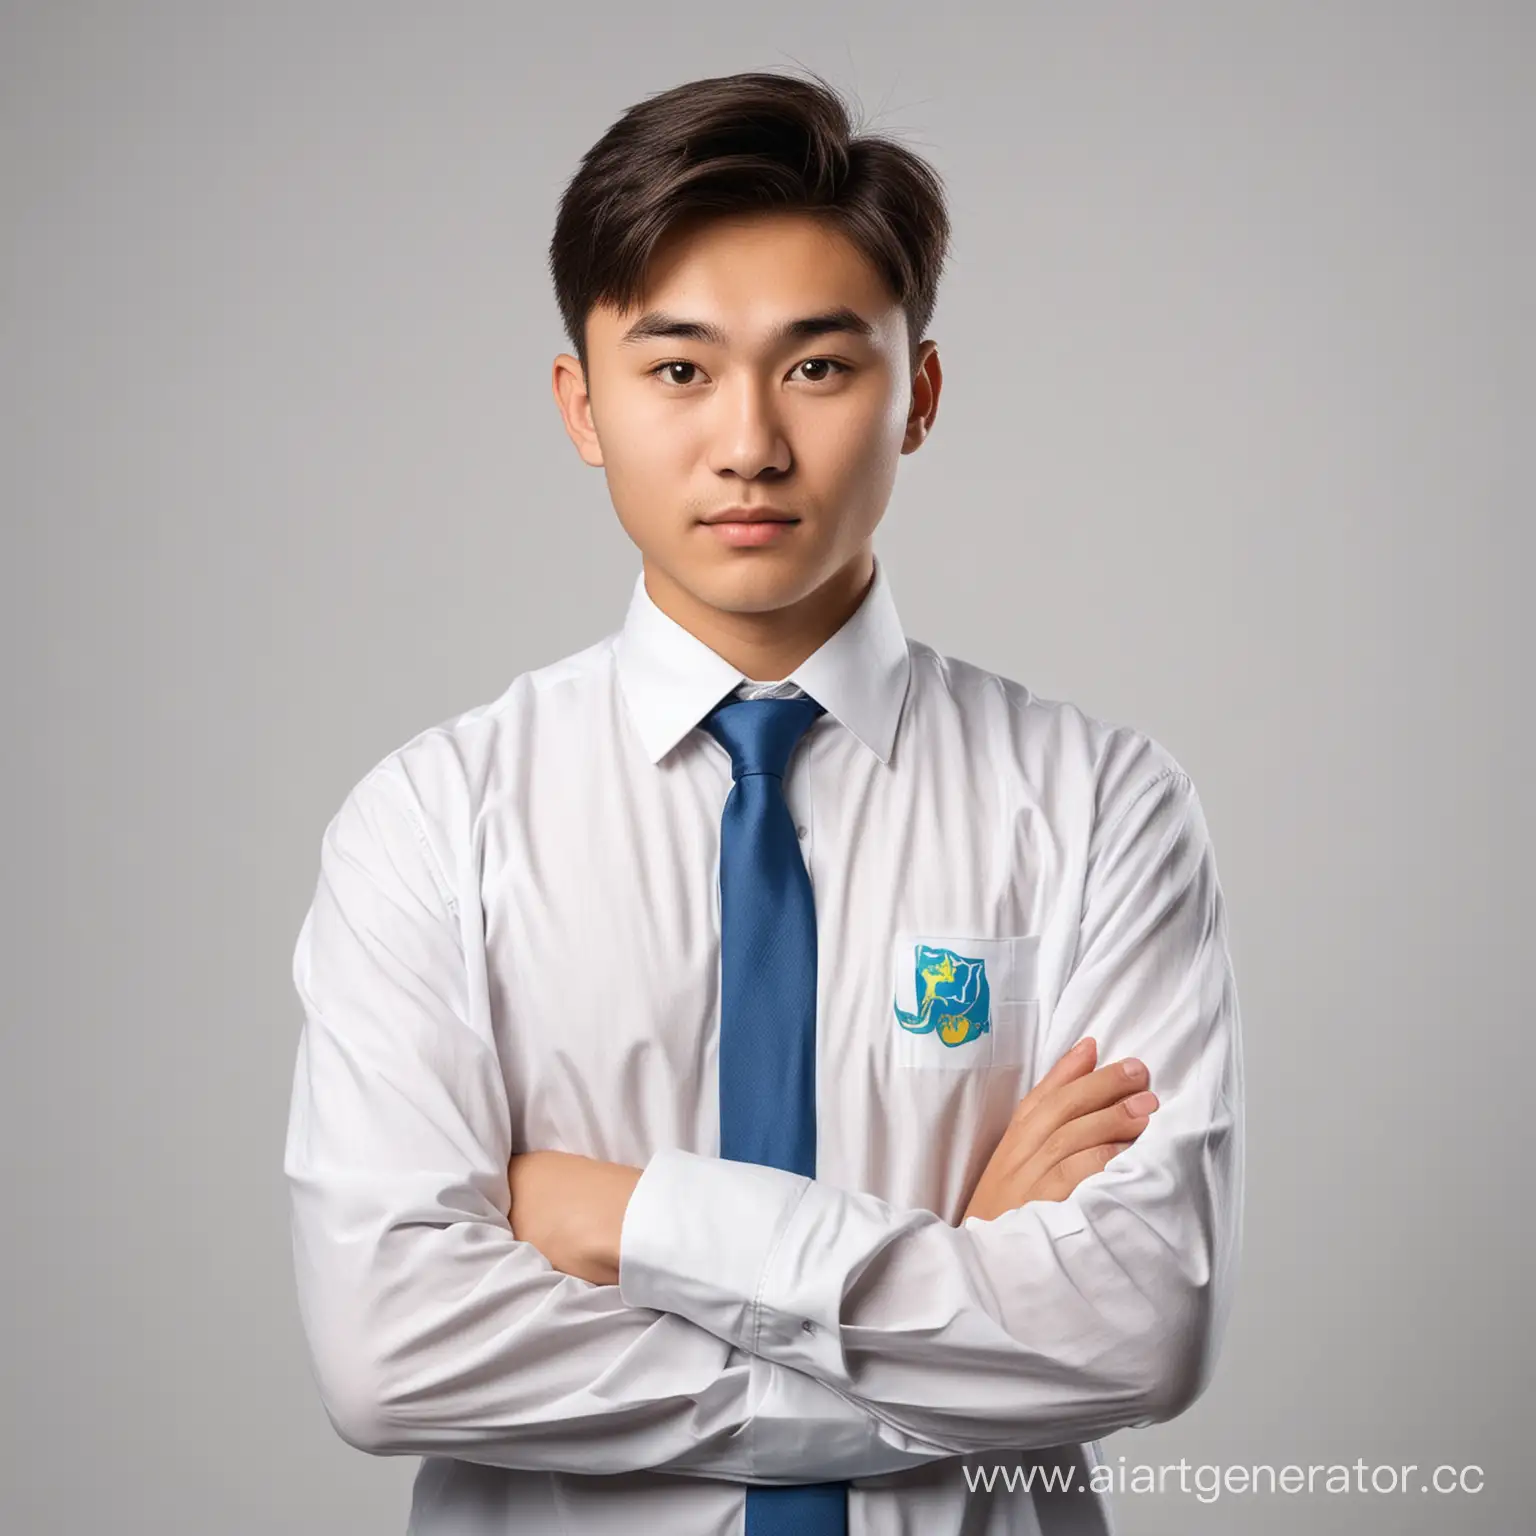 Ambitious-Kazakh-Youth-Pursuing-IT-Career